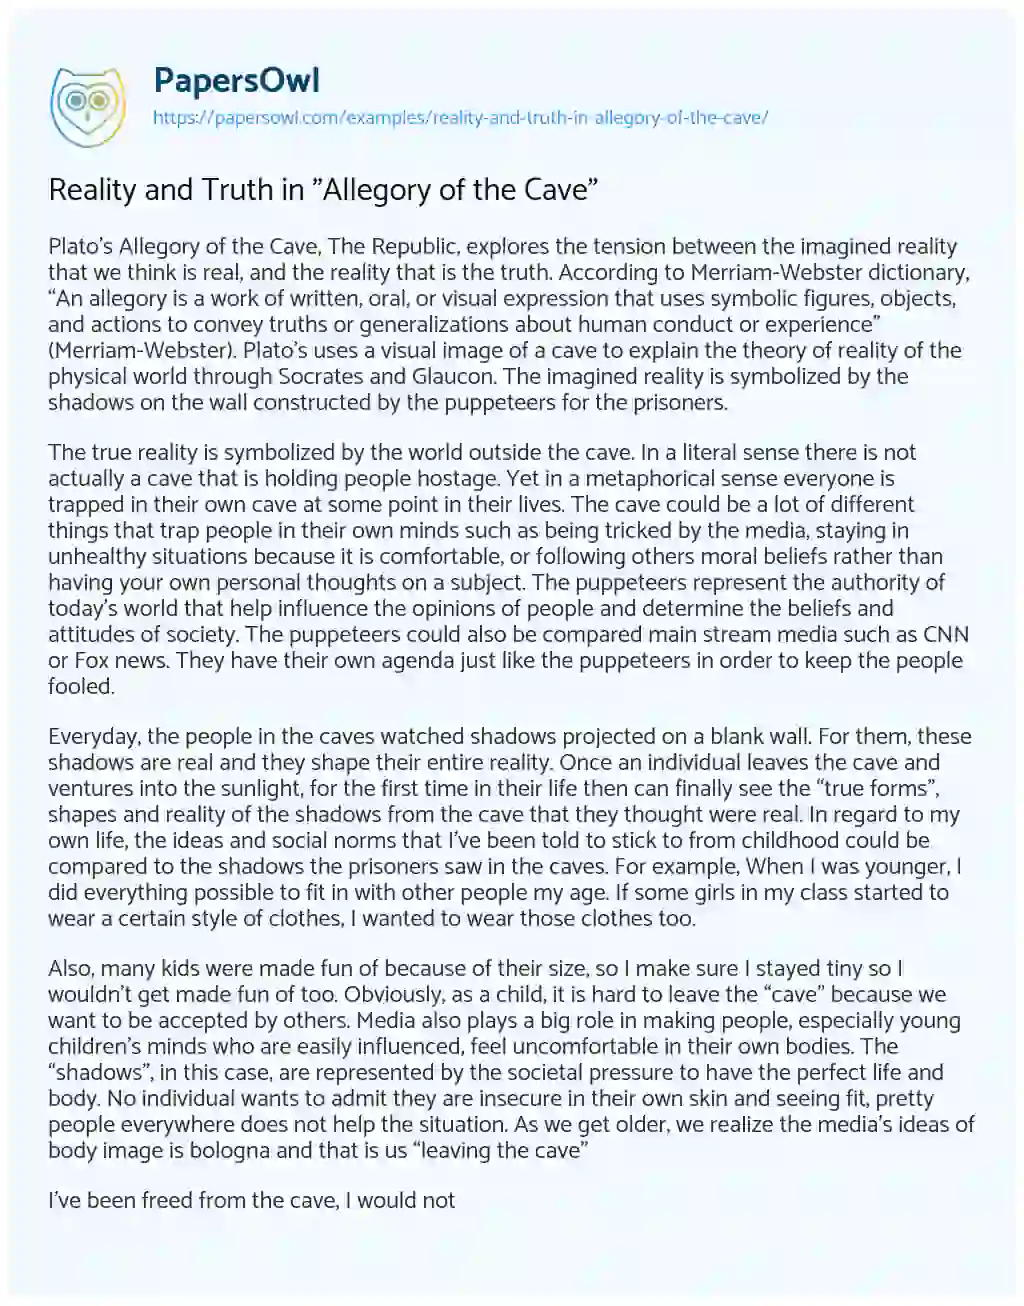 Essay on Reality and Truth in “Allegory of the Cave”